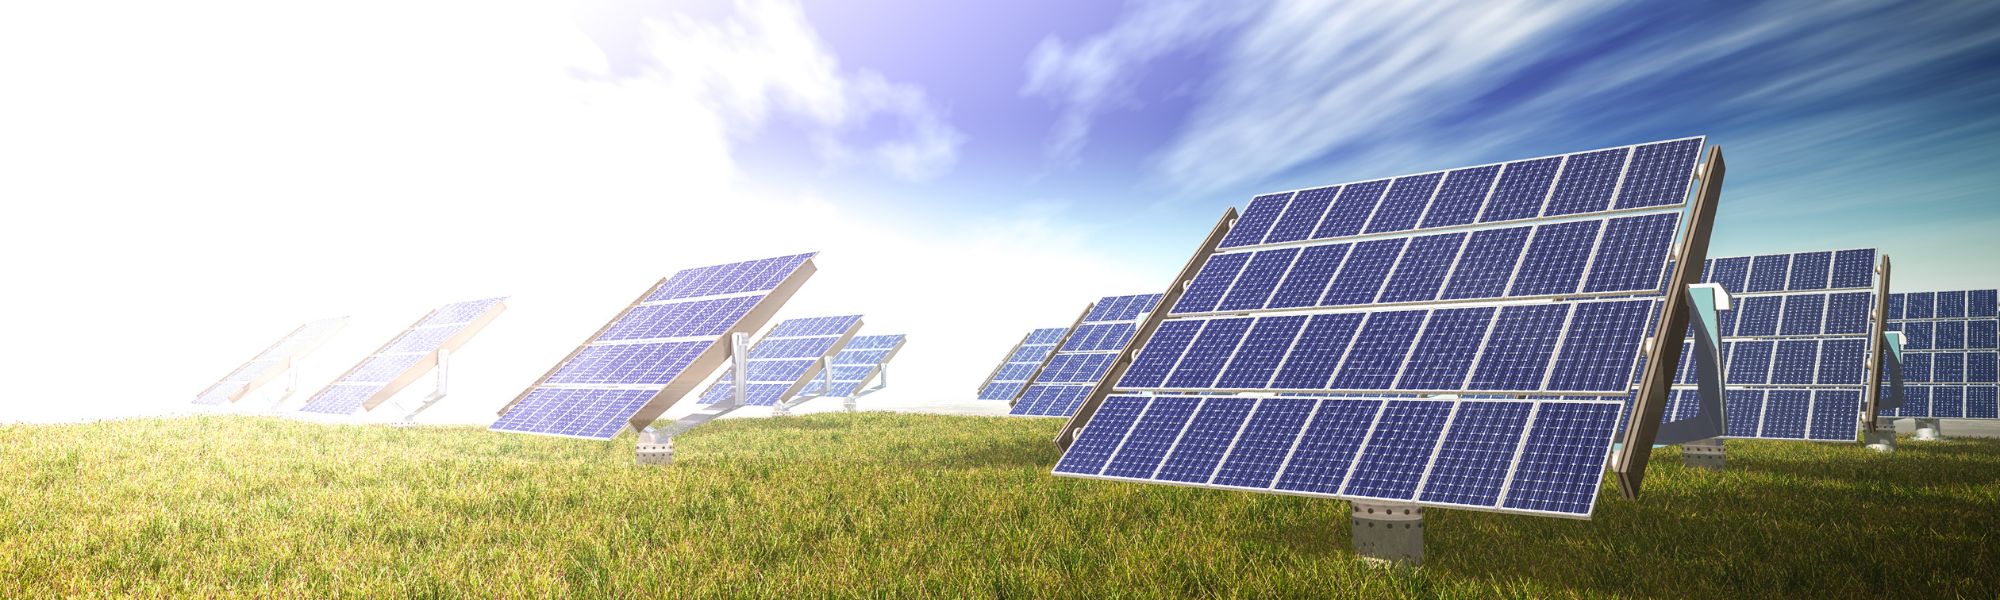 How Solar Panel Installation Can Help Your Warehouse Go Green and Save Money